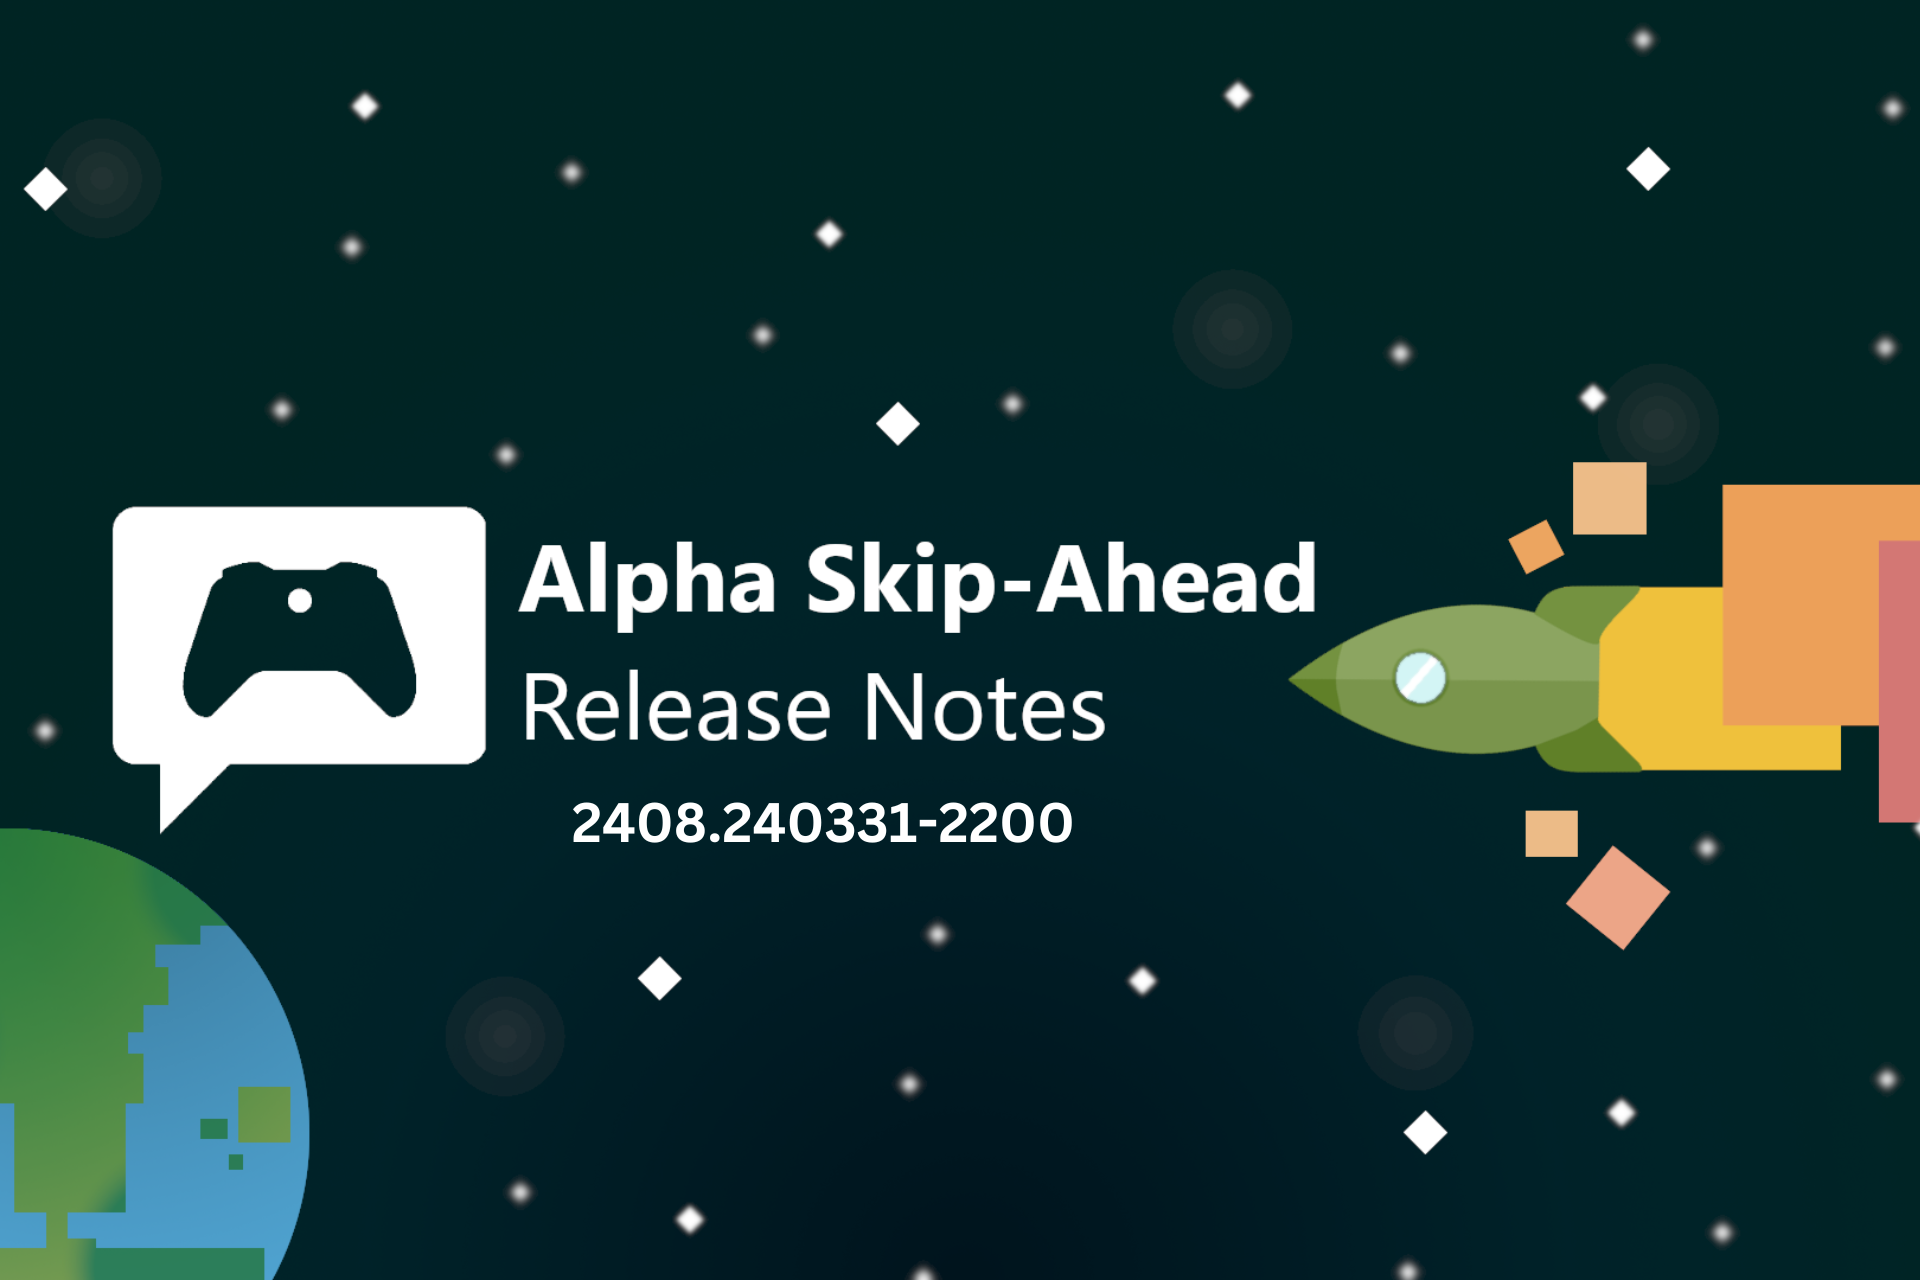 Microsoft releases a new 2408 update (2408.240331-2200) for Alpha Skip-Ahead XboxInsiders